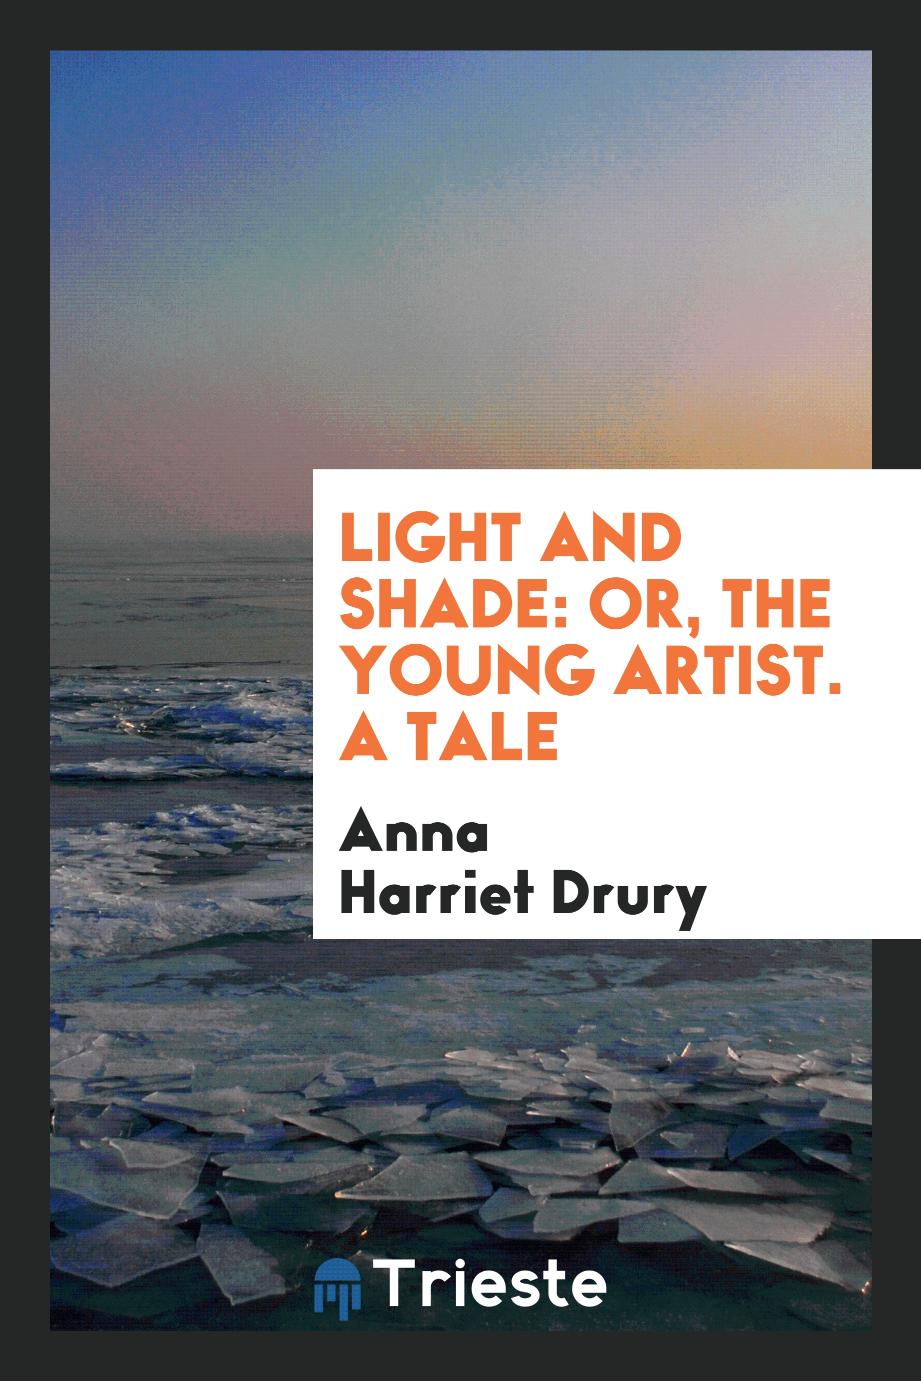 Light and Shade: Or, The Young Artist. A Tale